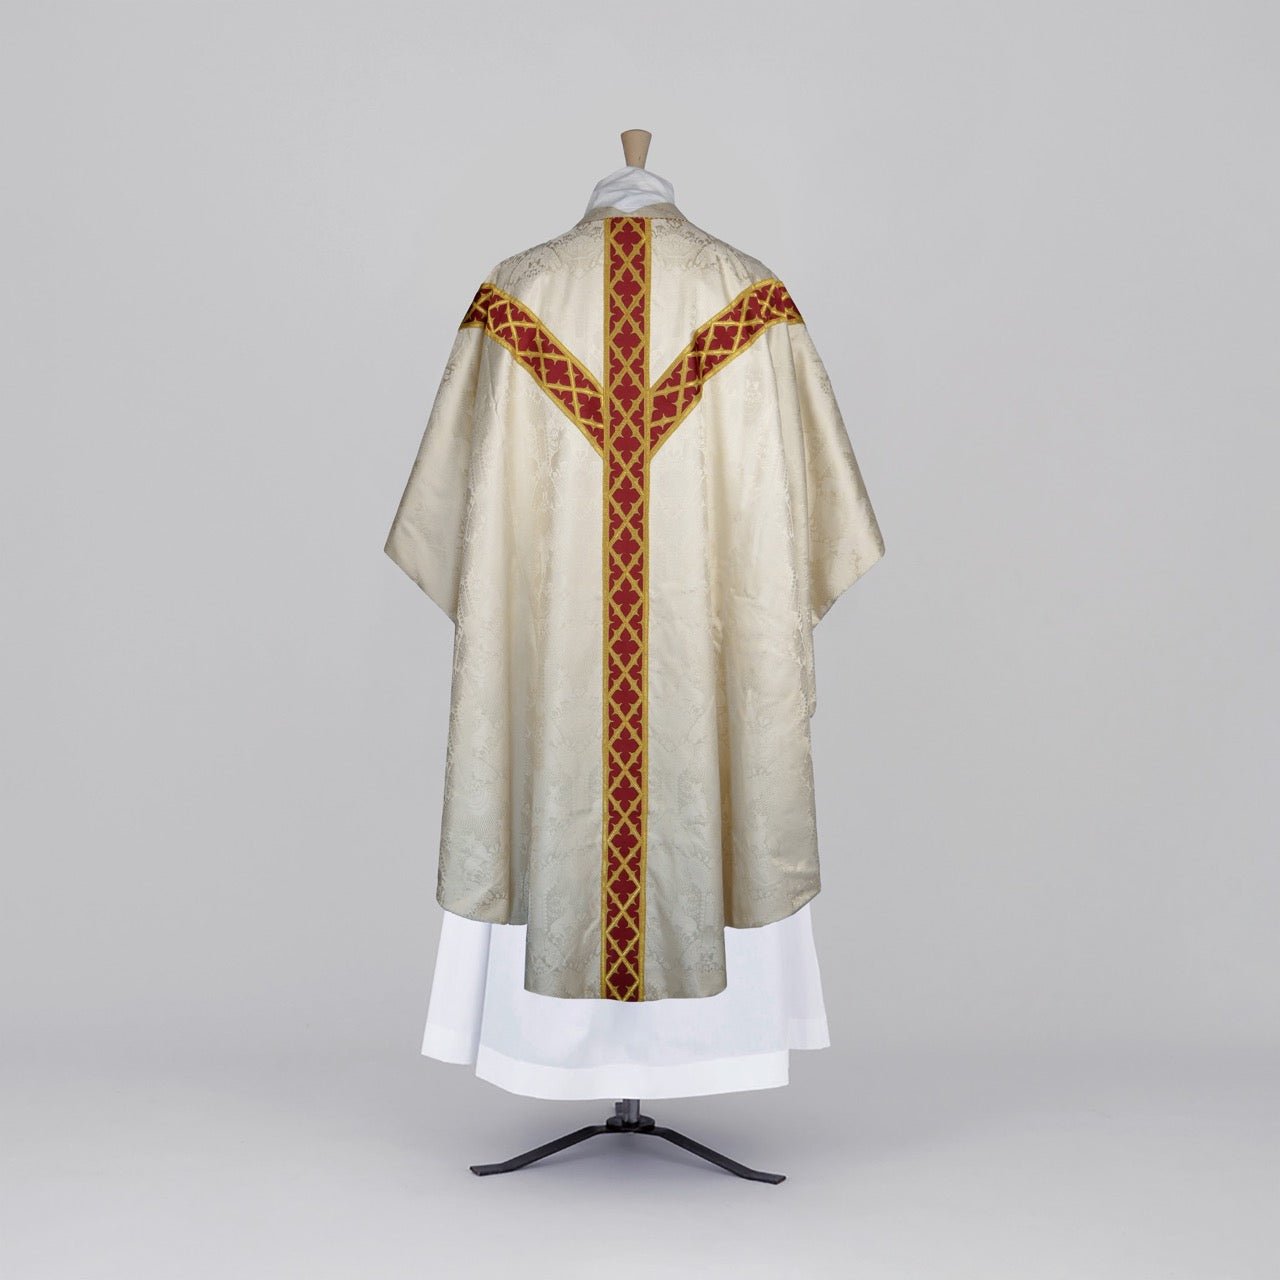 Full Gothic Chasuble in Cream 'Stag' with Gothic Trellis Orphreys - Watts & Co.